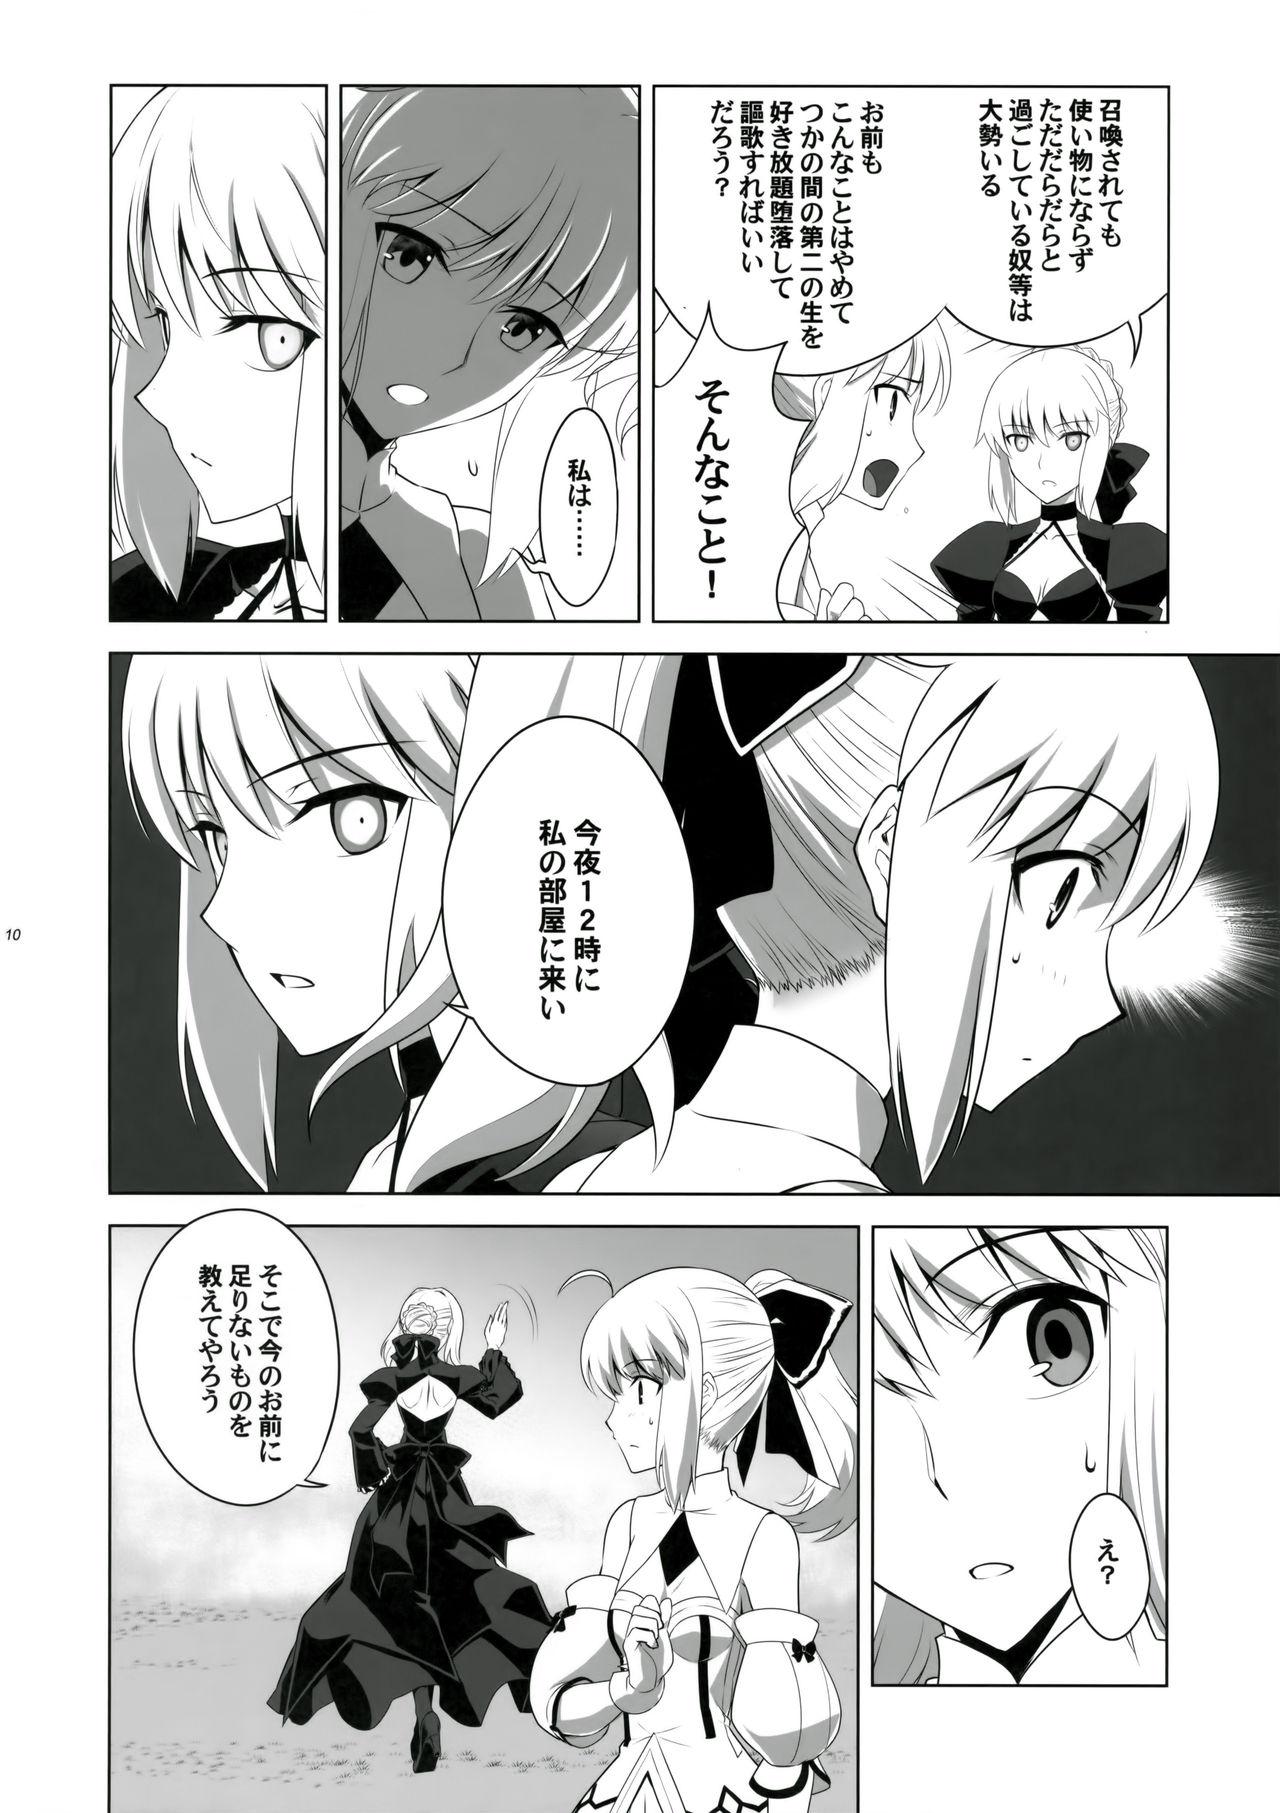 Groupfuck T*MOON COMPLEX GO 05 - Fate grand order Assfingering - Page 9